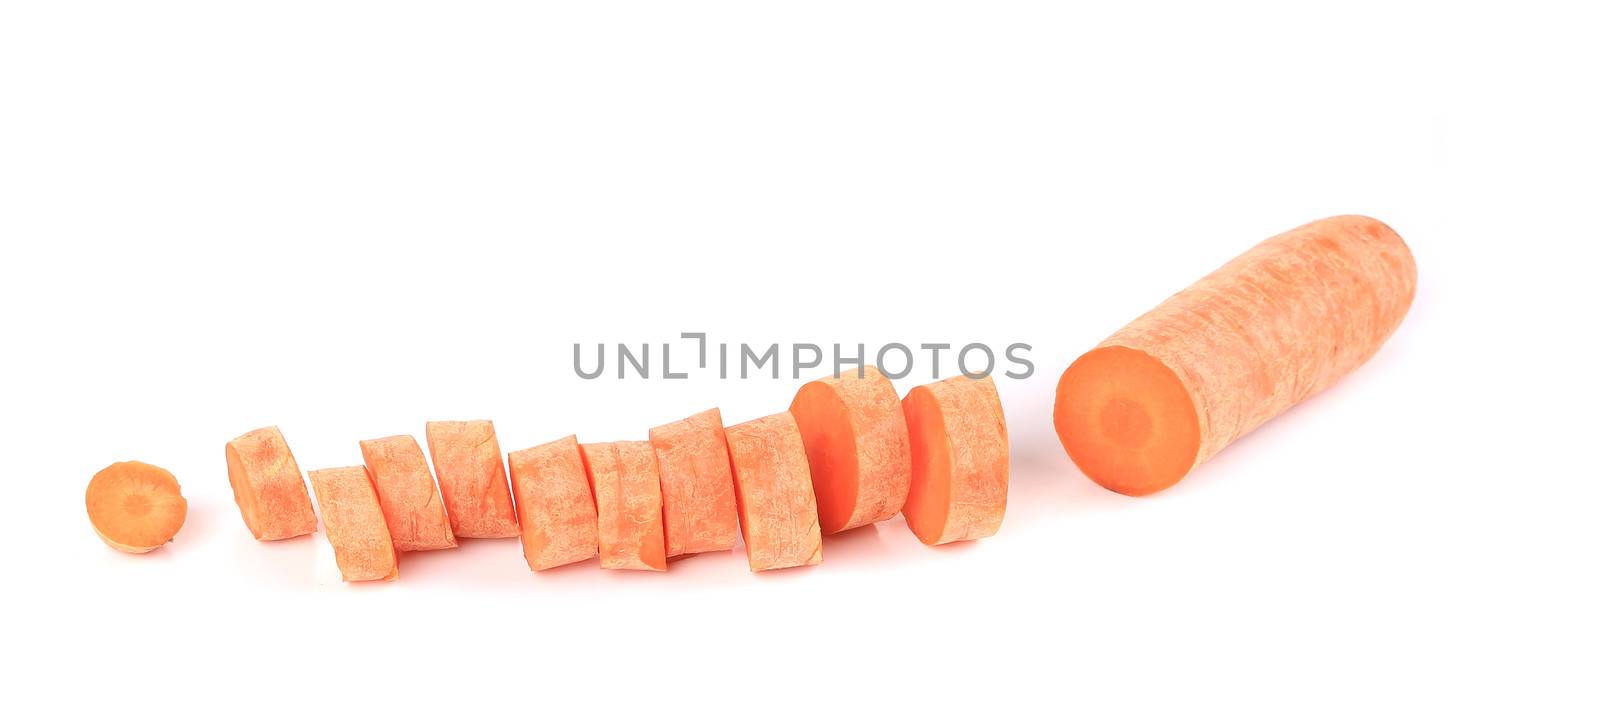 Chopped carrot slices. Isolated on a white background.